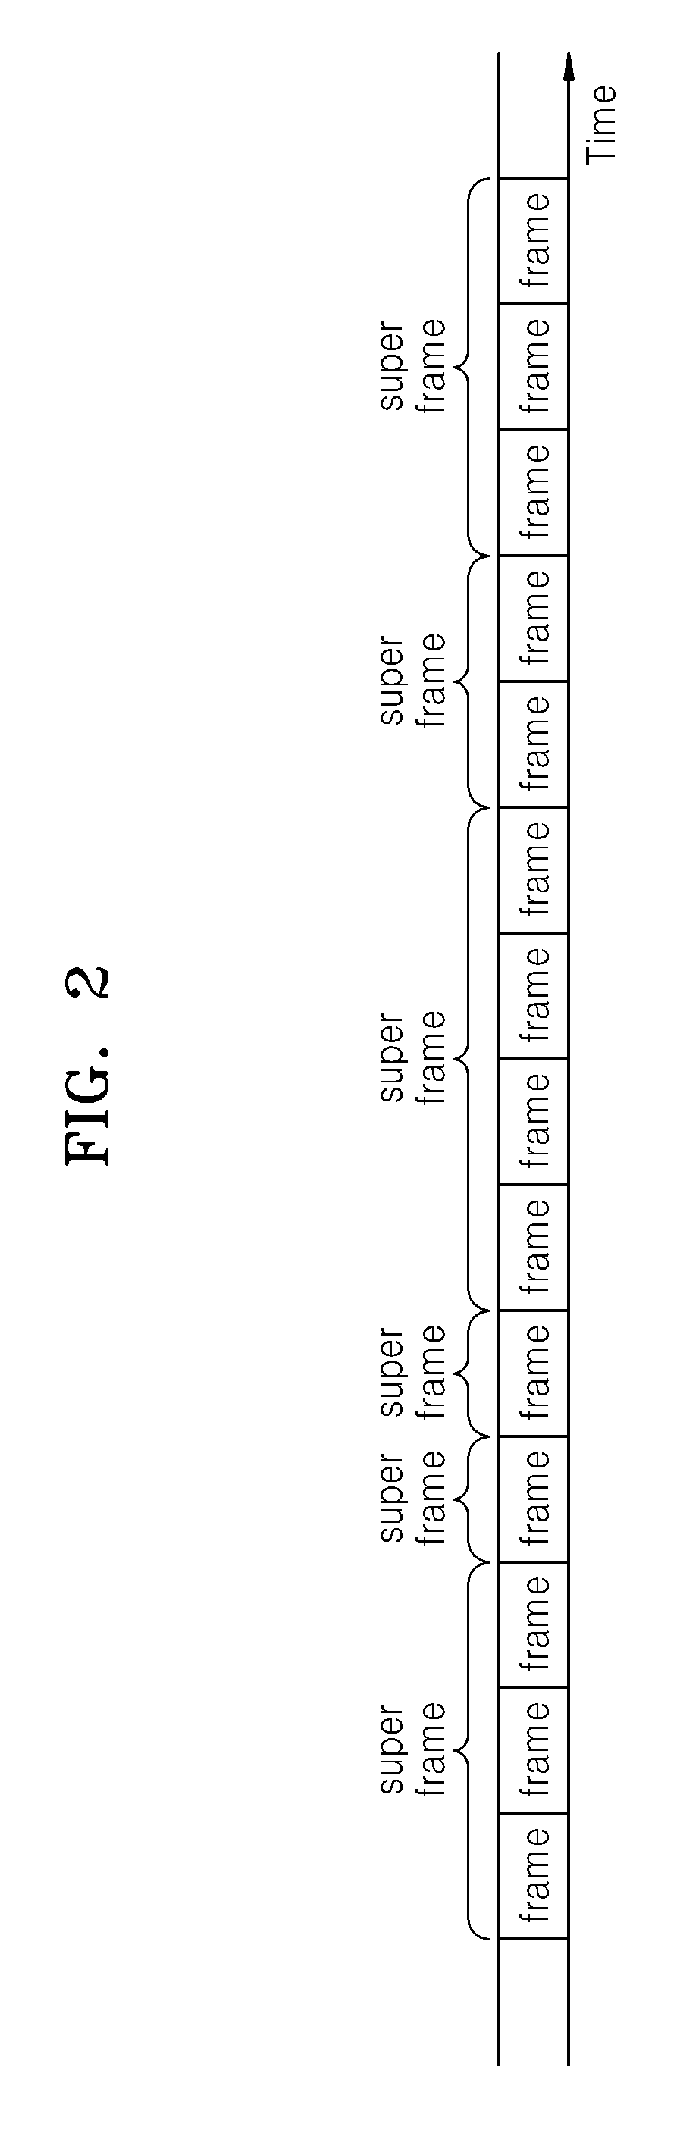 Method and apparatus for using and relaying frames over mobile multi-hop relay systems